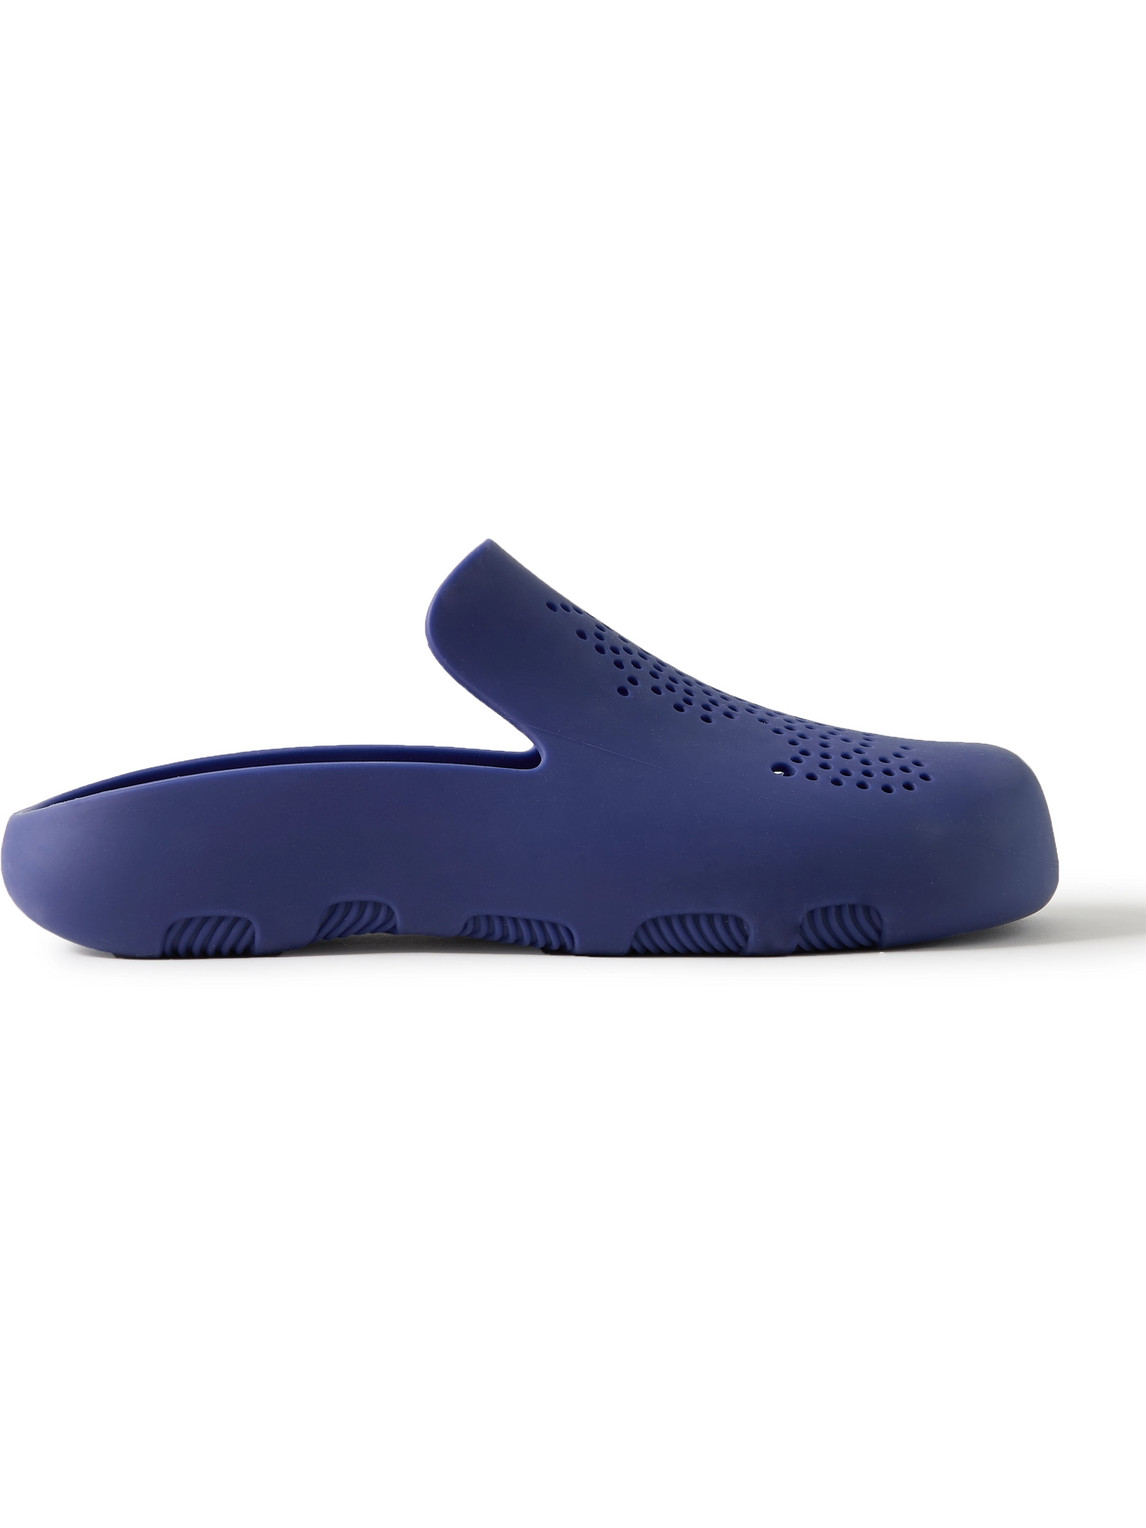 Burberry Embellished Perforated Rubber Clogs In Blue